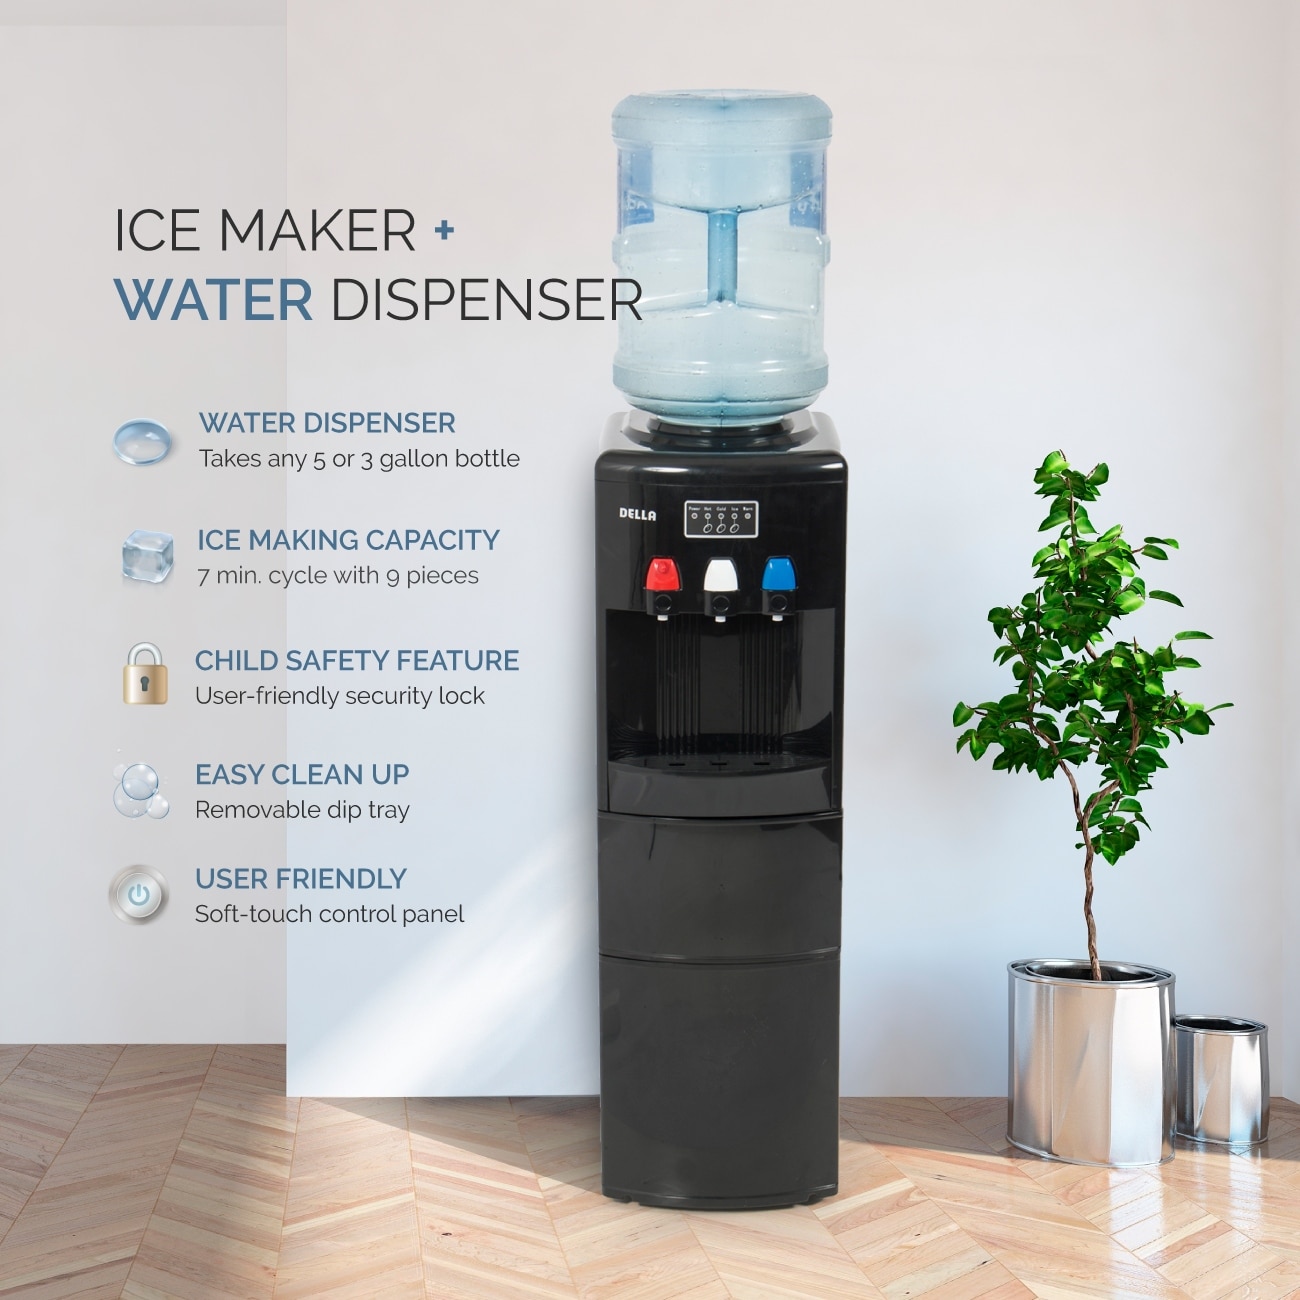 27LBS/24H Ice Maker Machine with Child Safety Lock KUPPET 2-in-1 Water Cooler Dispenser with Built-in Ice Maker Black Electric Hot Cold Water Cooler 